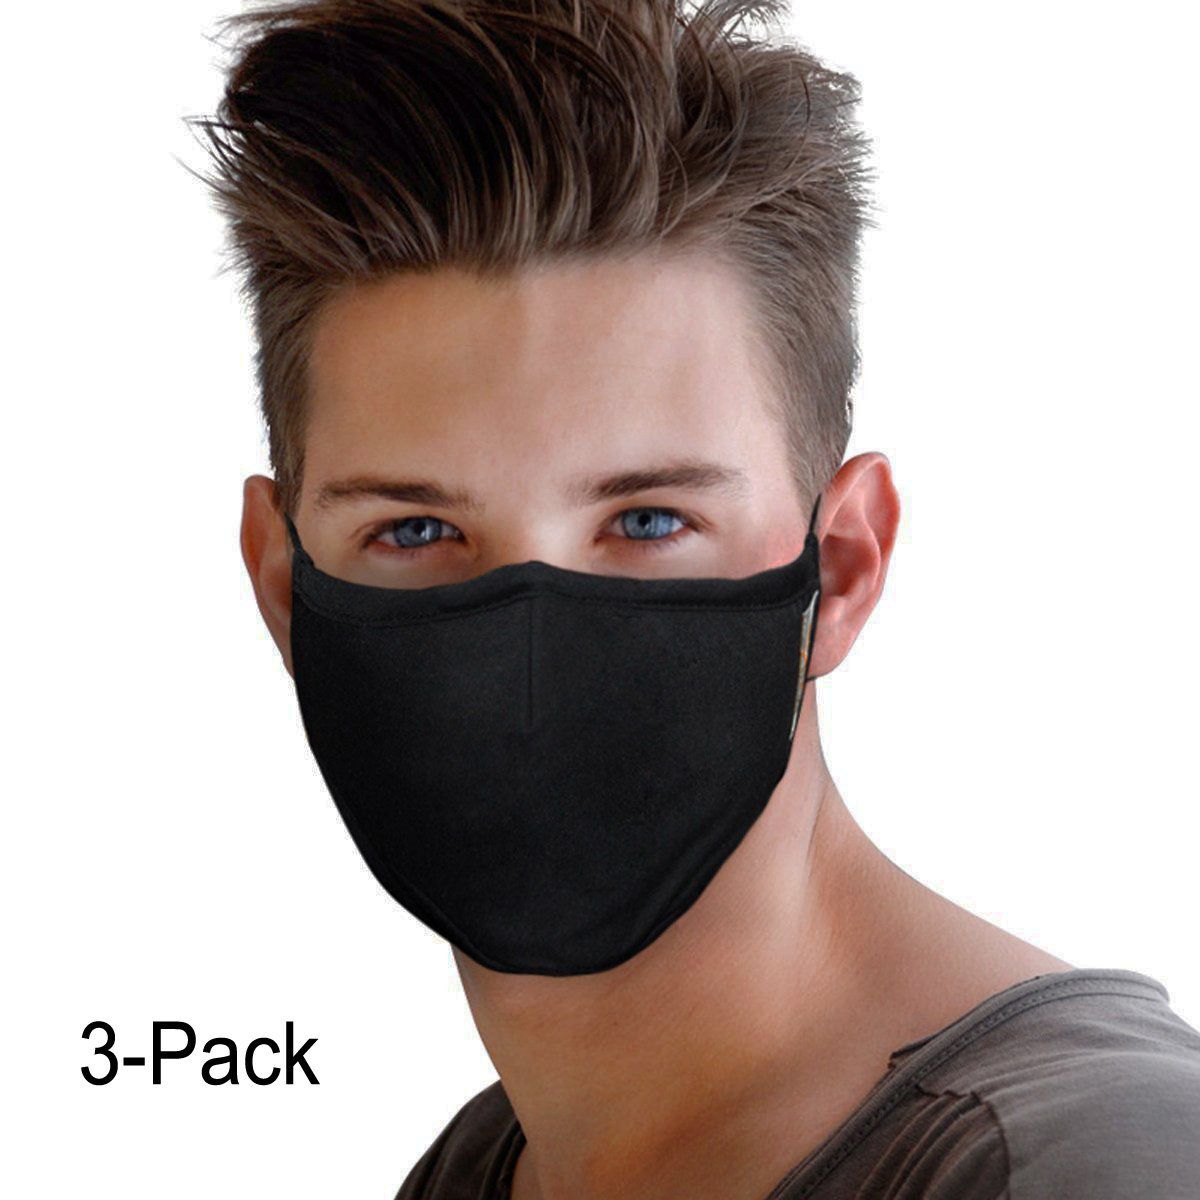 Download Small Face Mask - Buy Small Face Mask Online at Low Price ...